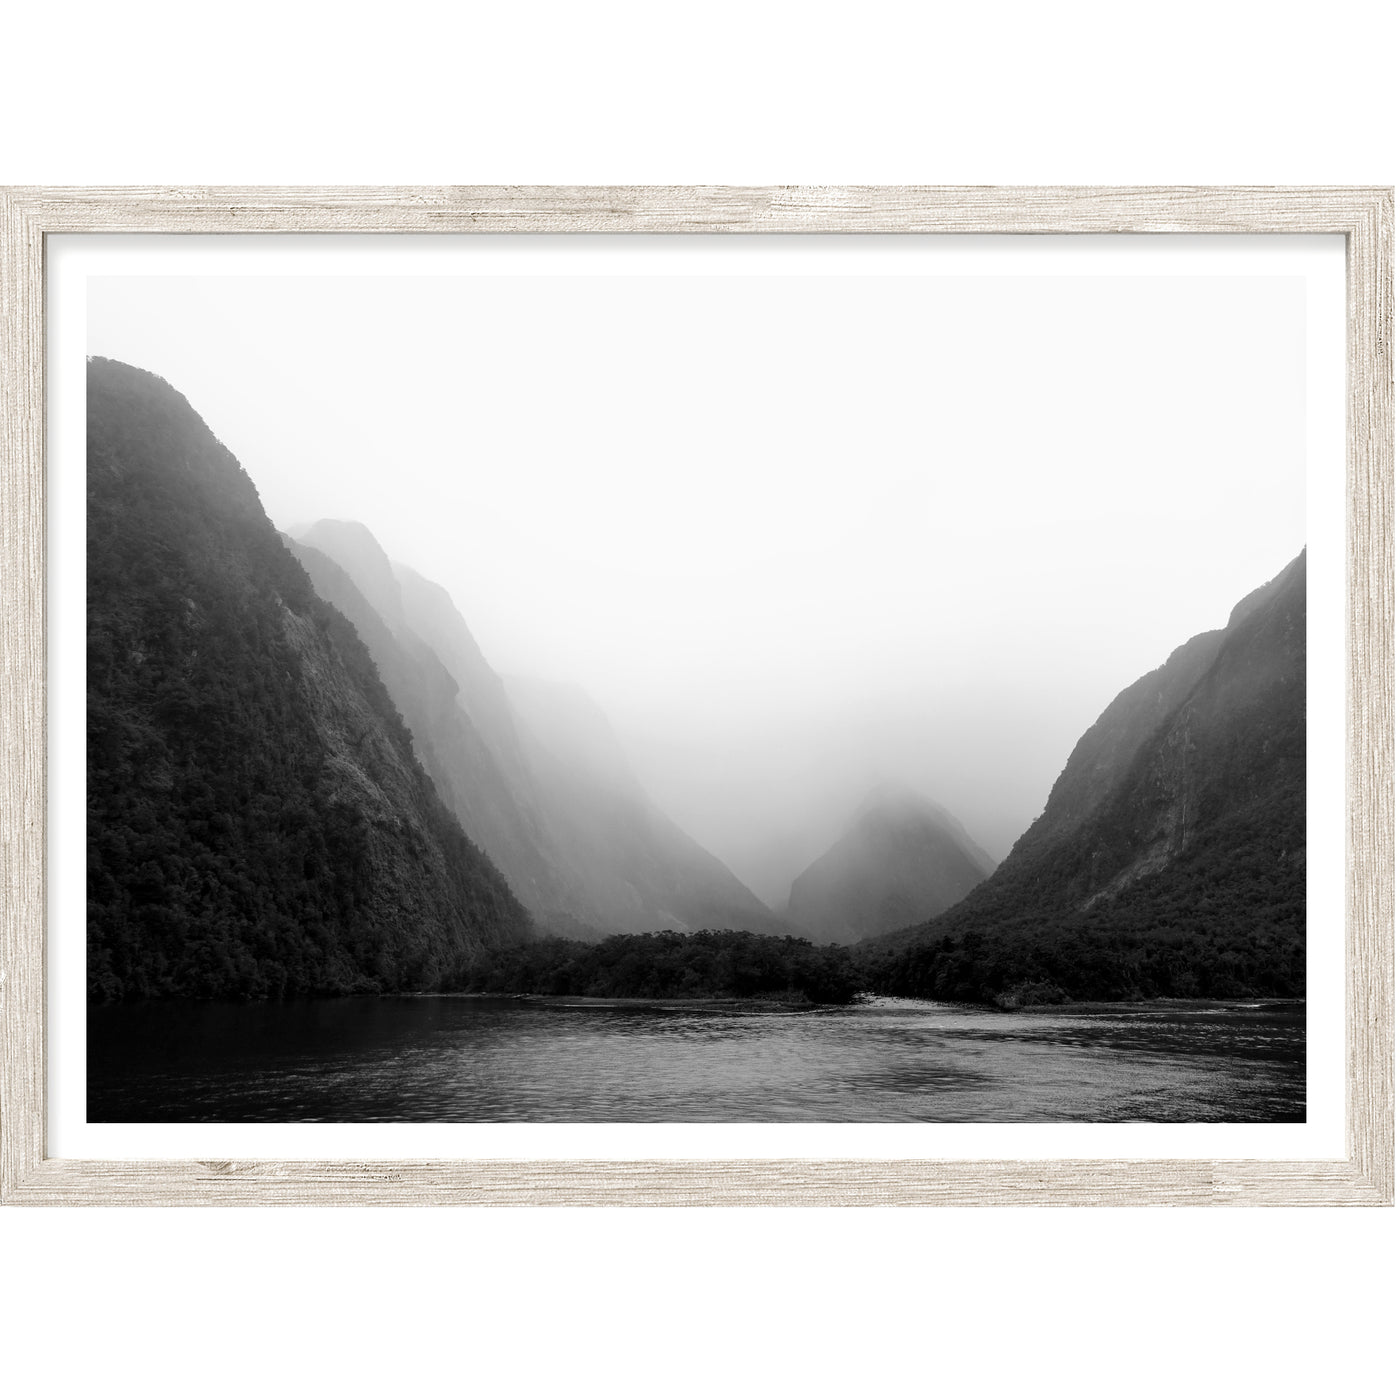 New Zealand Nature Wall Art, Black & White Milford Sound Landscape Photography Print, Large Wall Decor | arrtopia